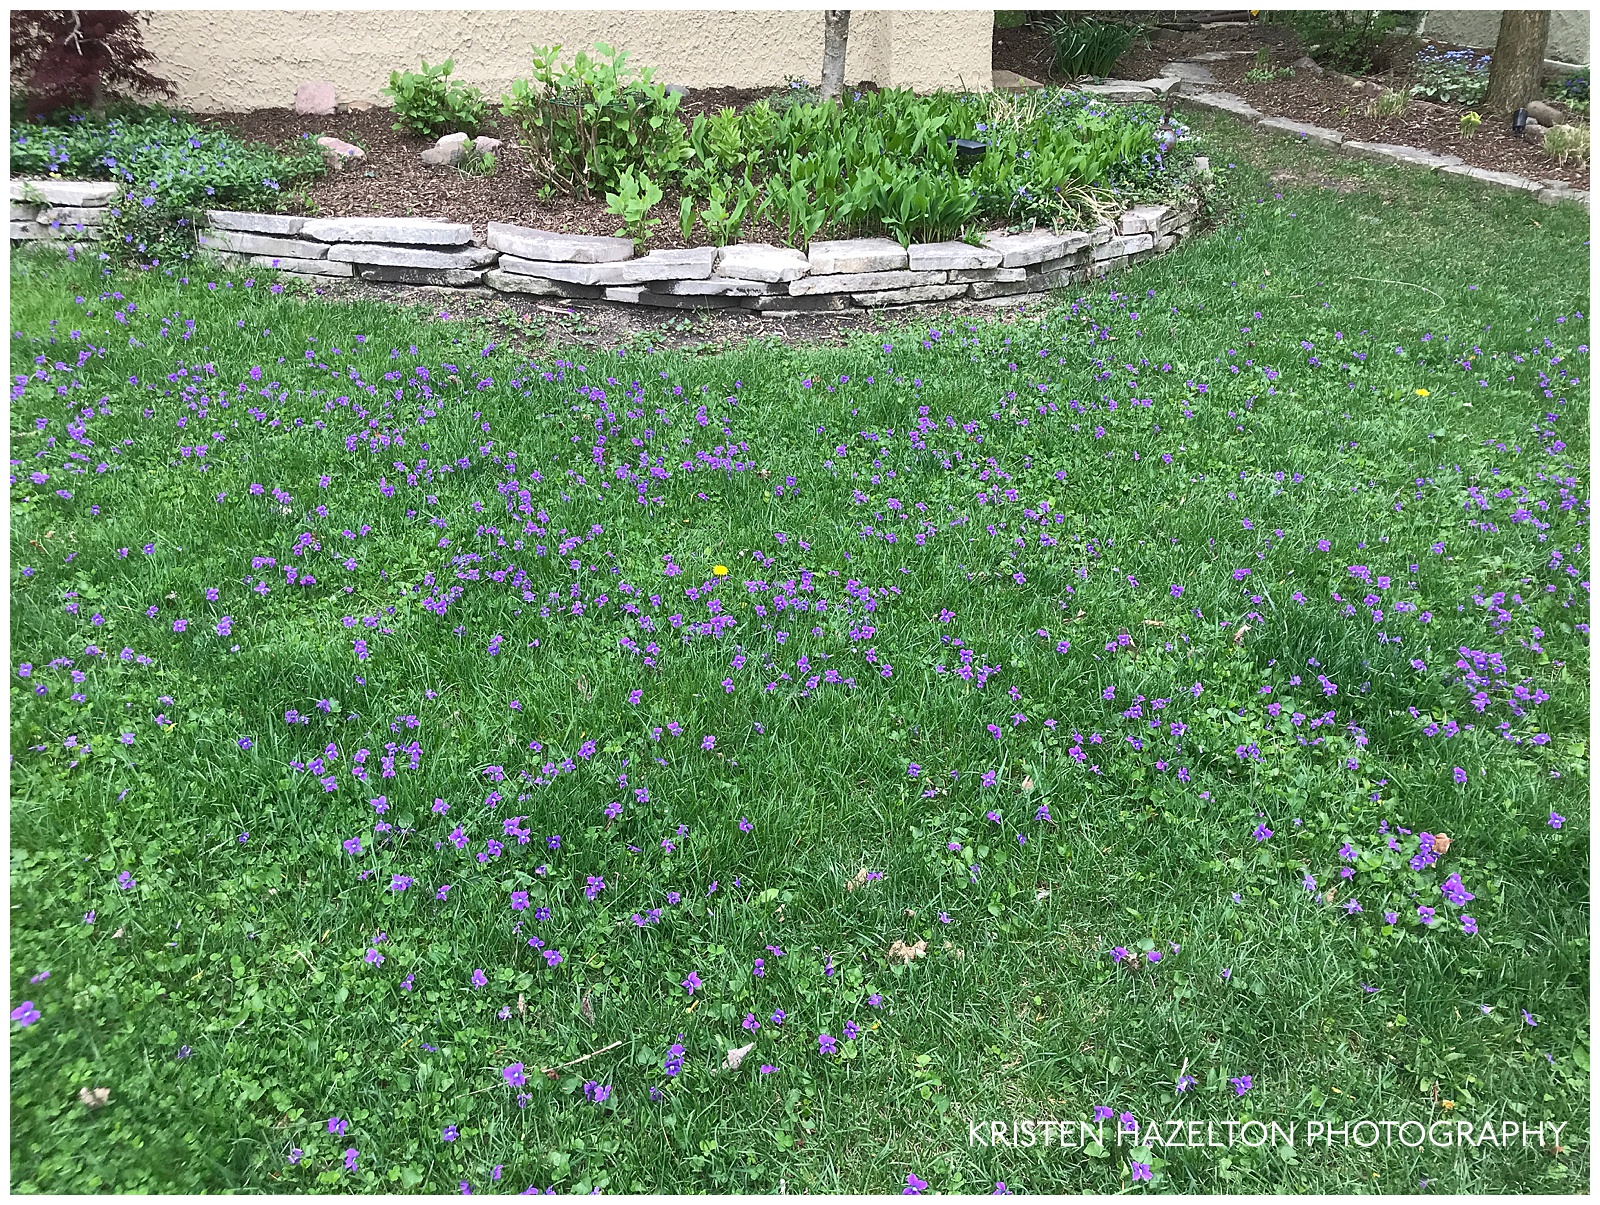 Lawn covered with violets 